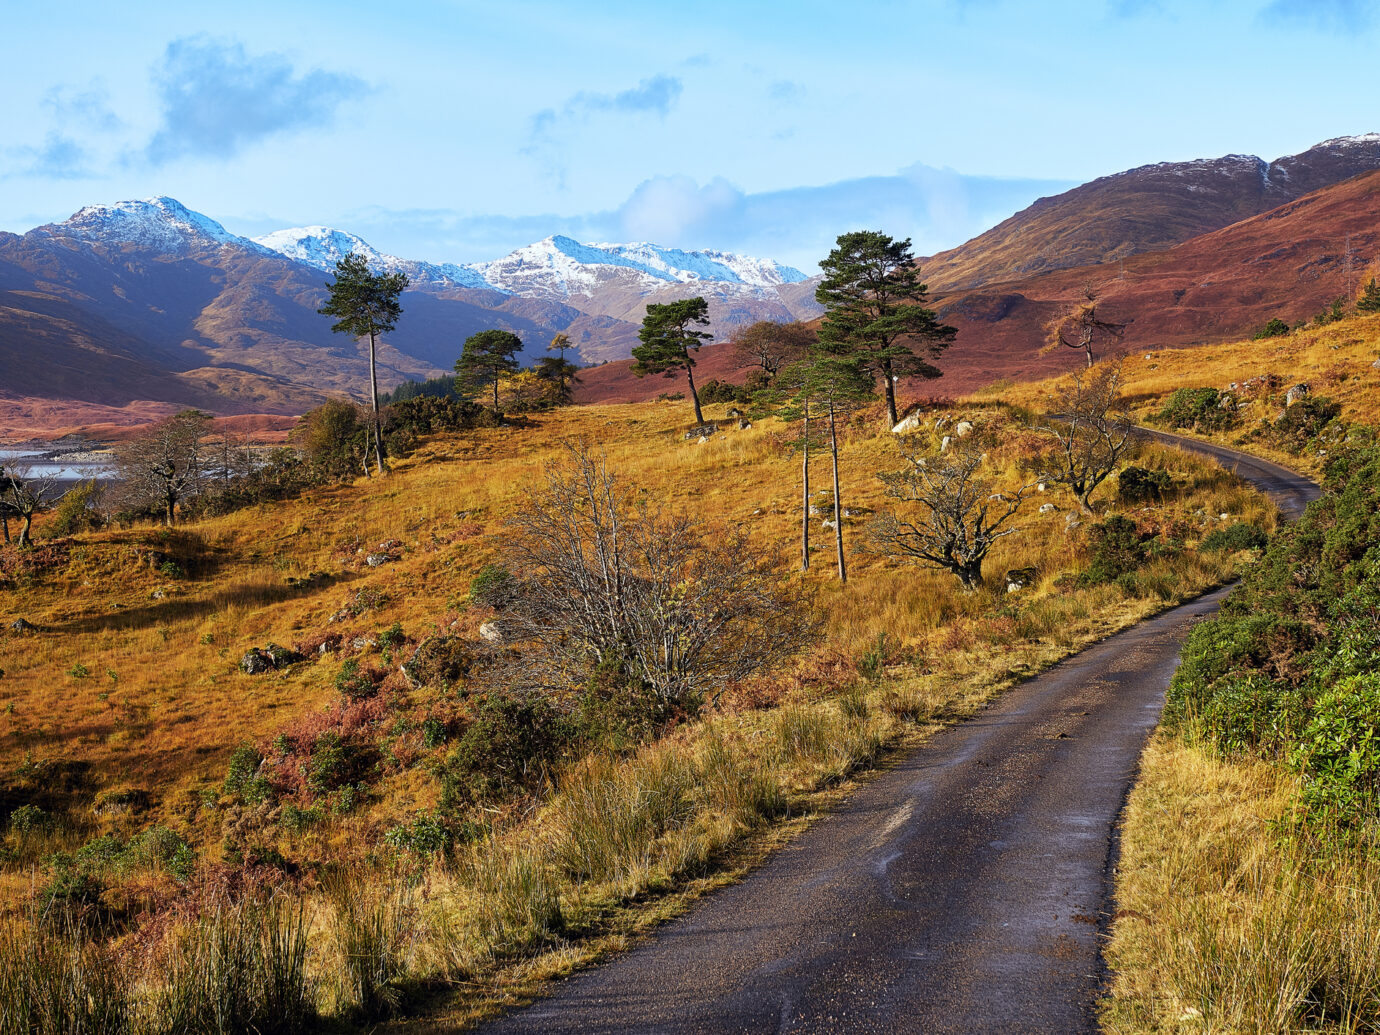 Loch Quoich in the Western Highlands of Scotland with its autumn colour and first snows.